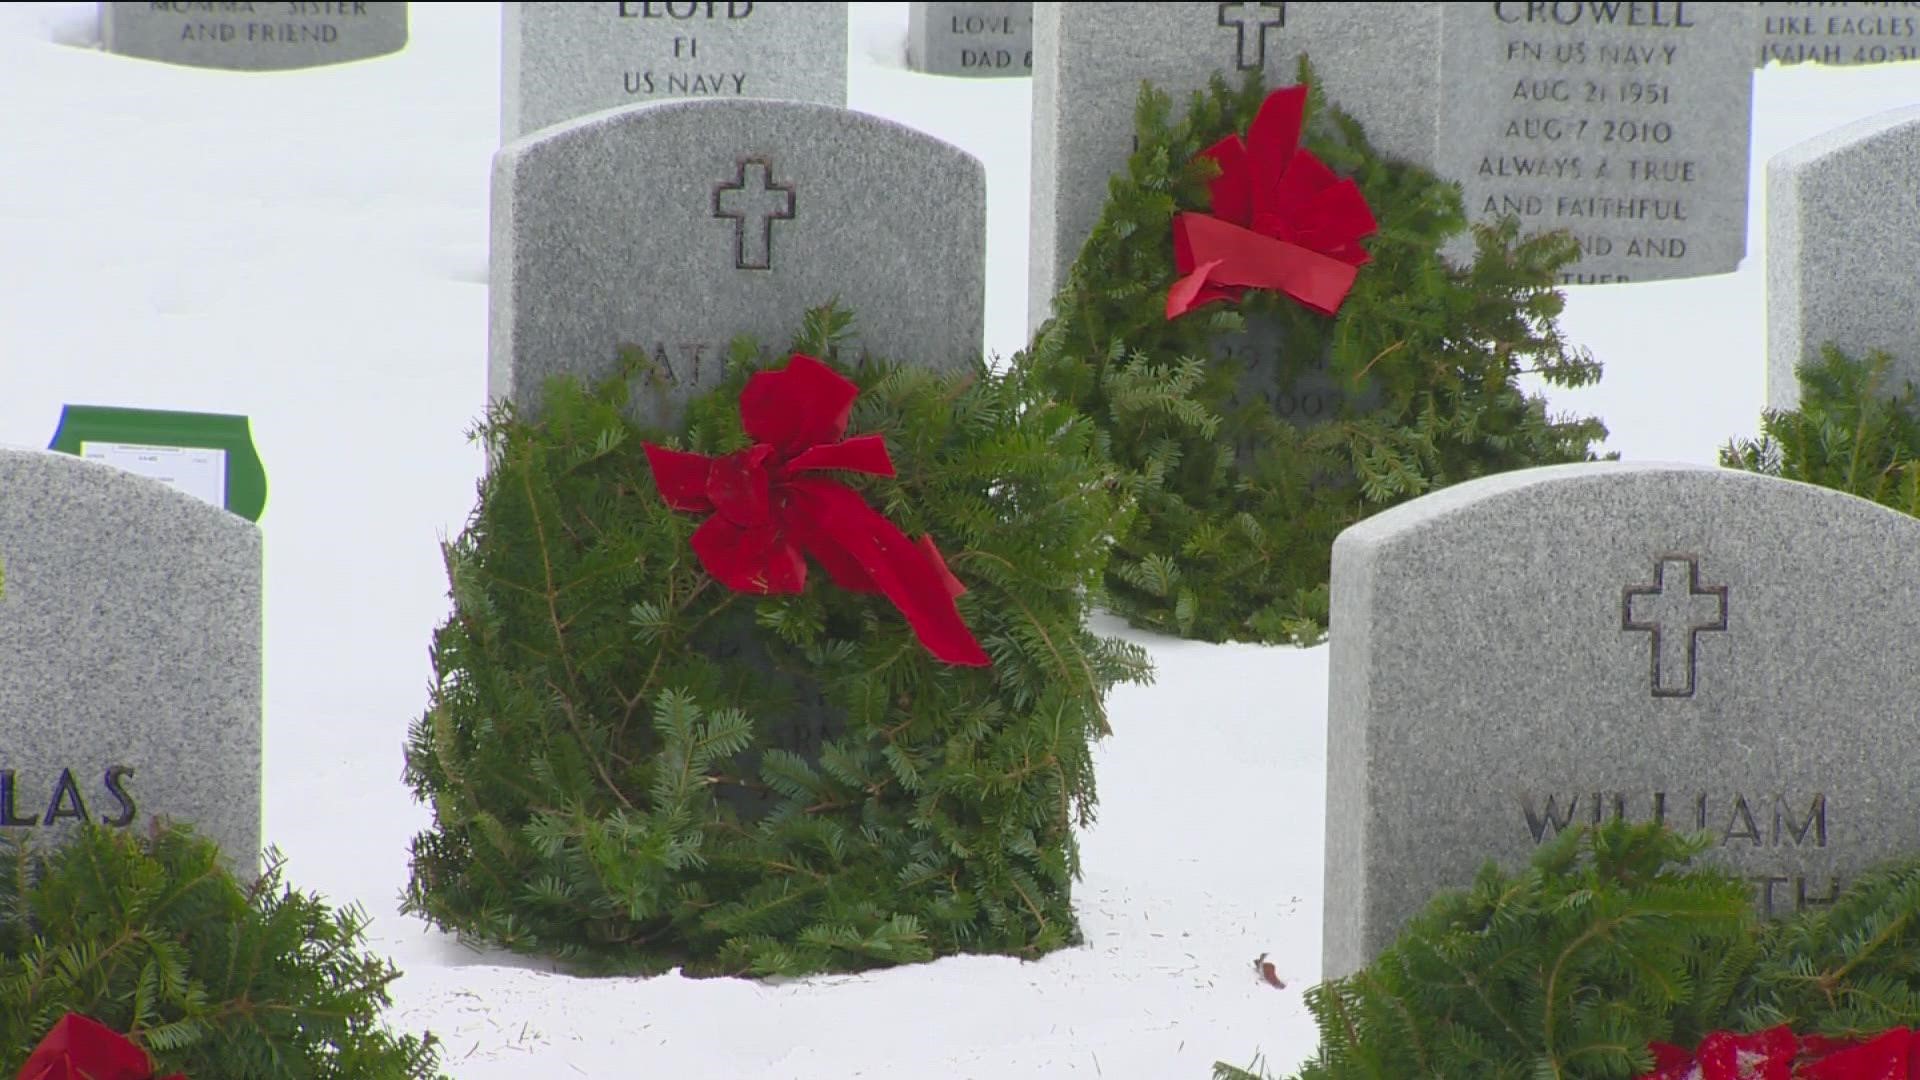 Every December, wreaths are placed near hundreds of thousands of burial sites to honor service members who sacrificed for our country.